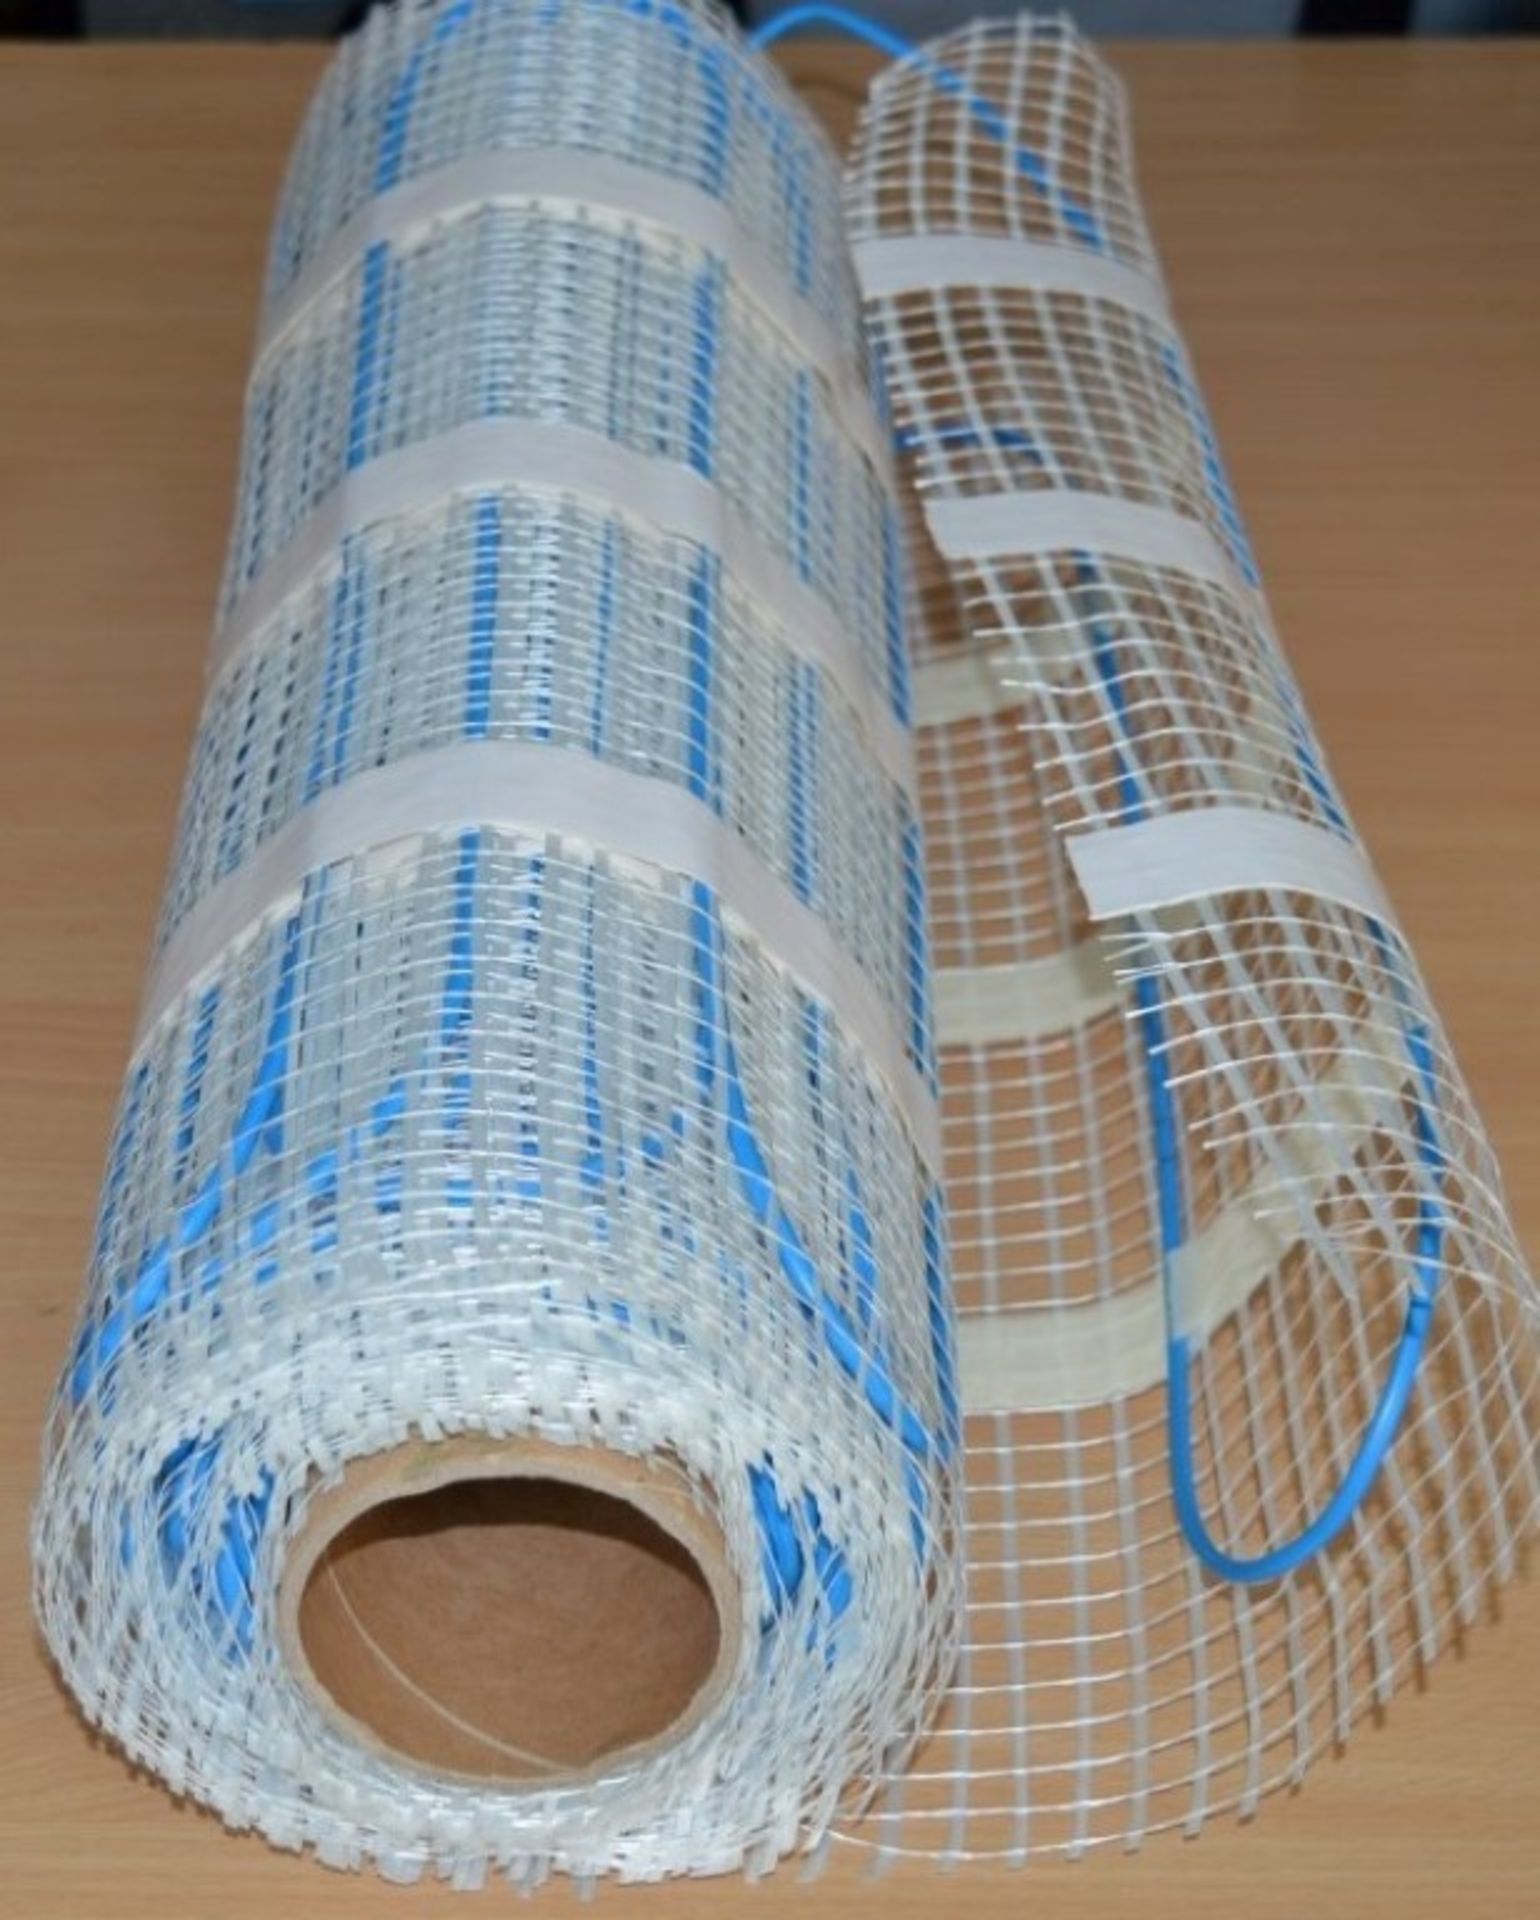 1 x Underfloor Heating System by MyFloorHeating - Covers 6 Square Meters - Includes 0.5 x 12m - Image 6 of 10